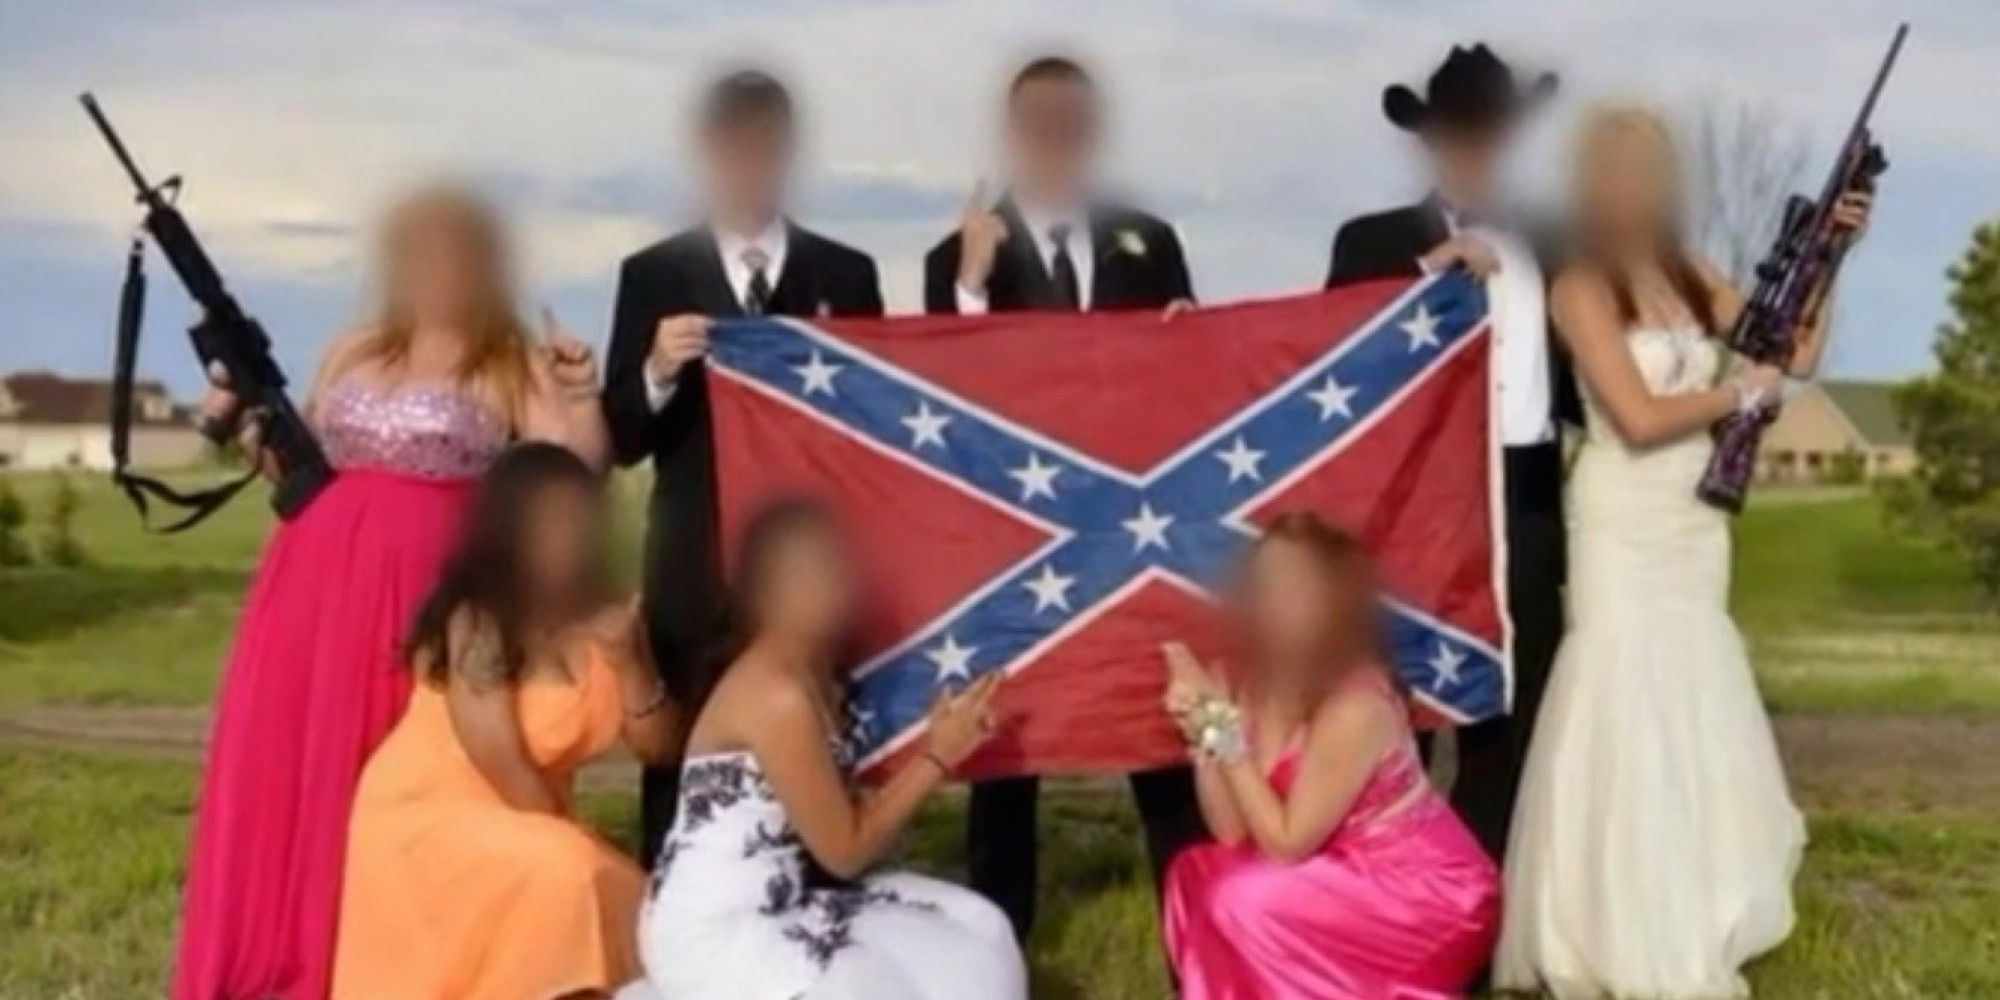 Teen prom dress controversy